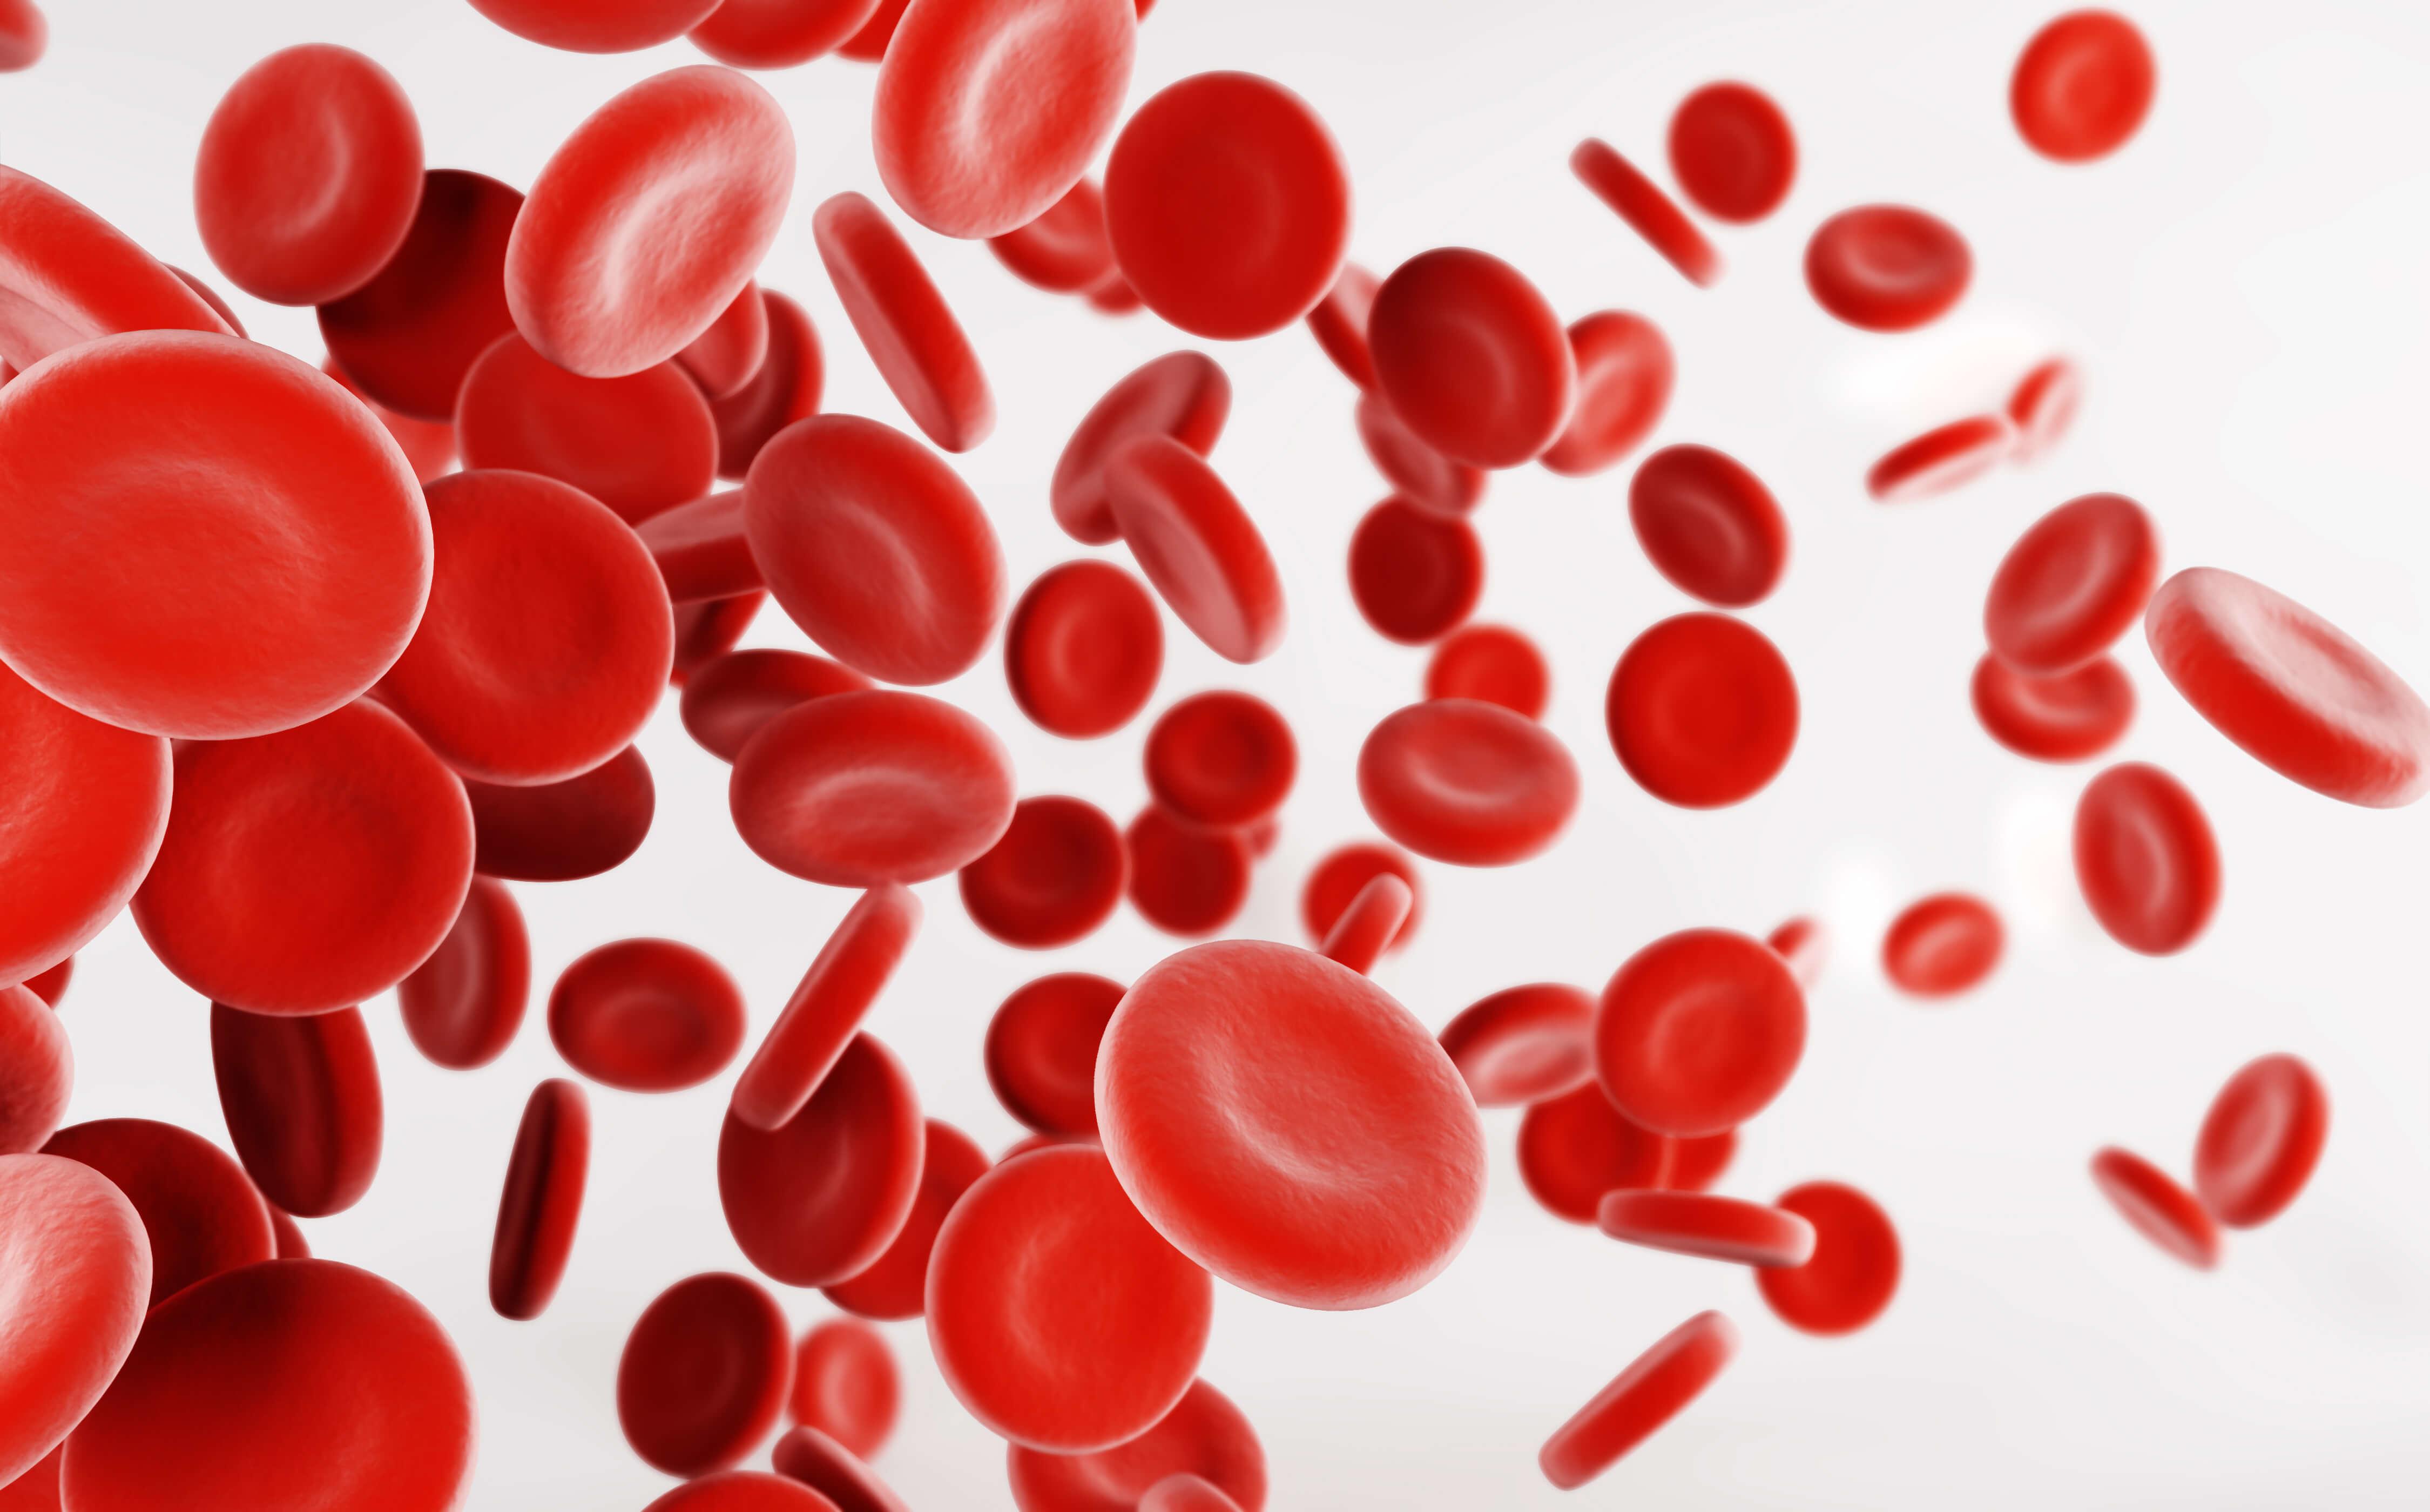 Hemolytic Anemia from Footstrikes blood cells featured